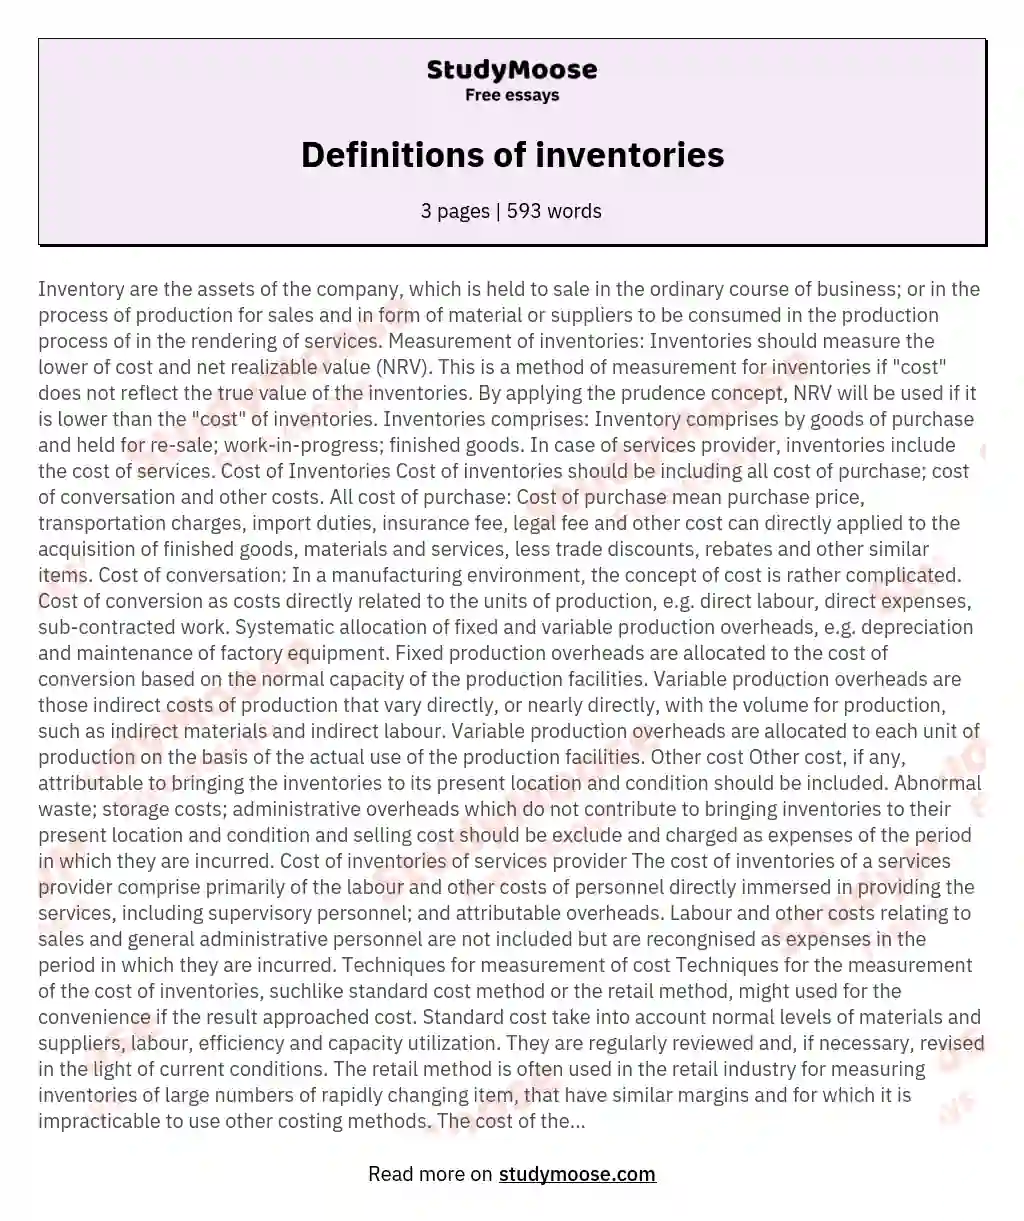 Definitions of inventories essay